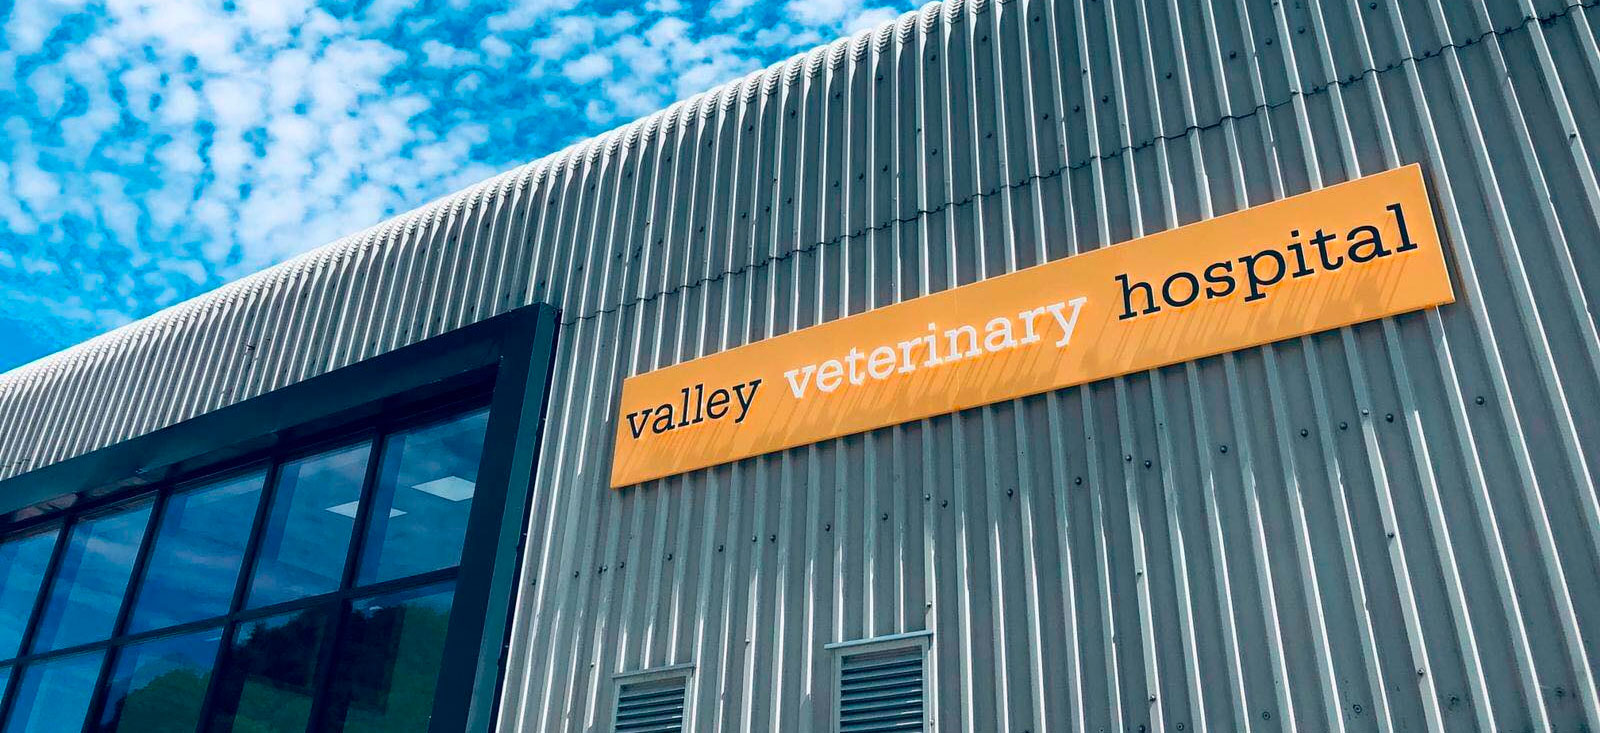 Valley Vets physiotherapy - Dedicated animal hospital with prestigious physiotherapy suite